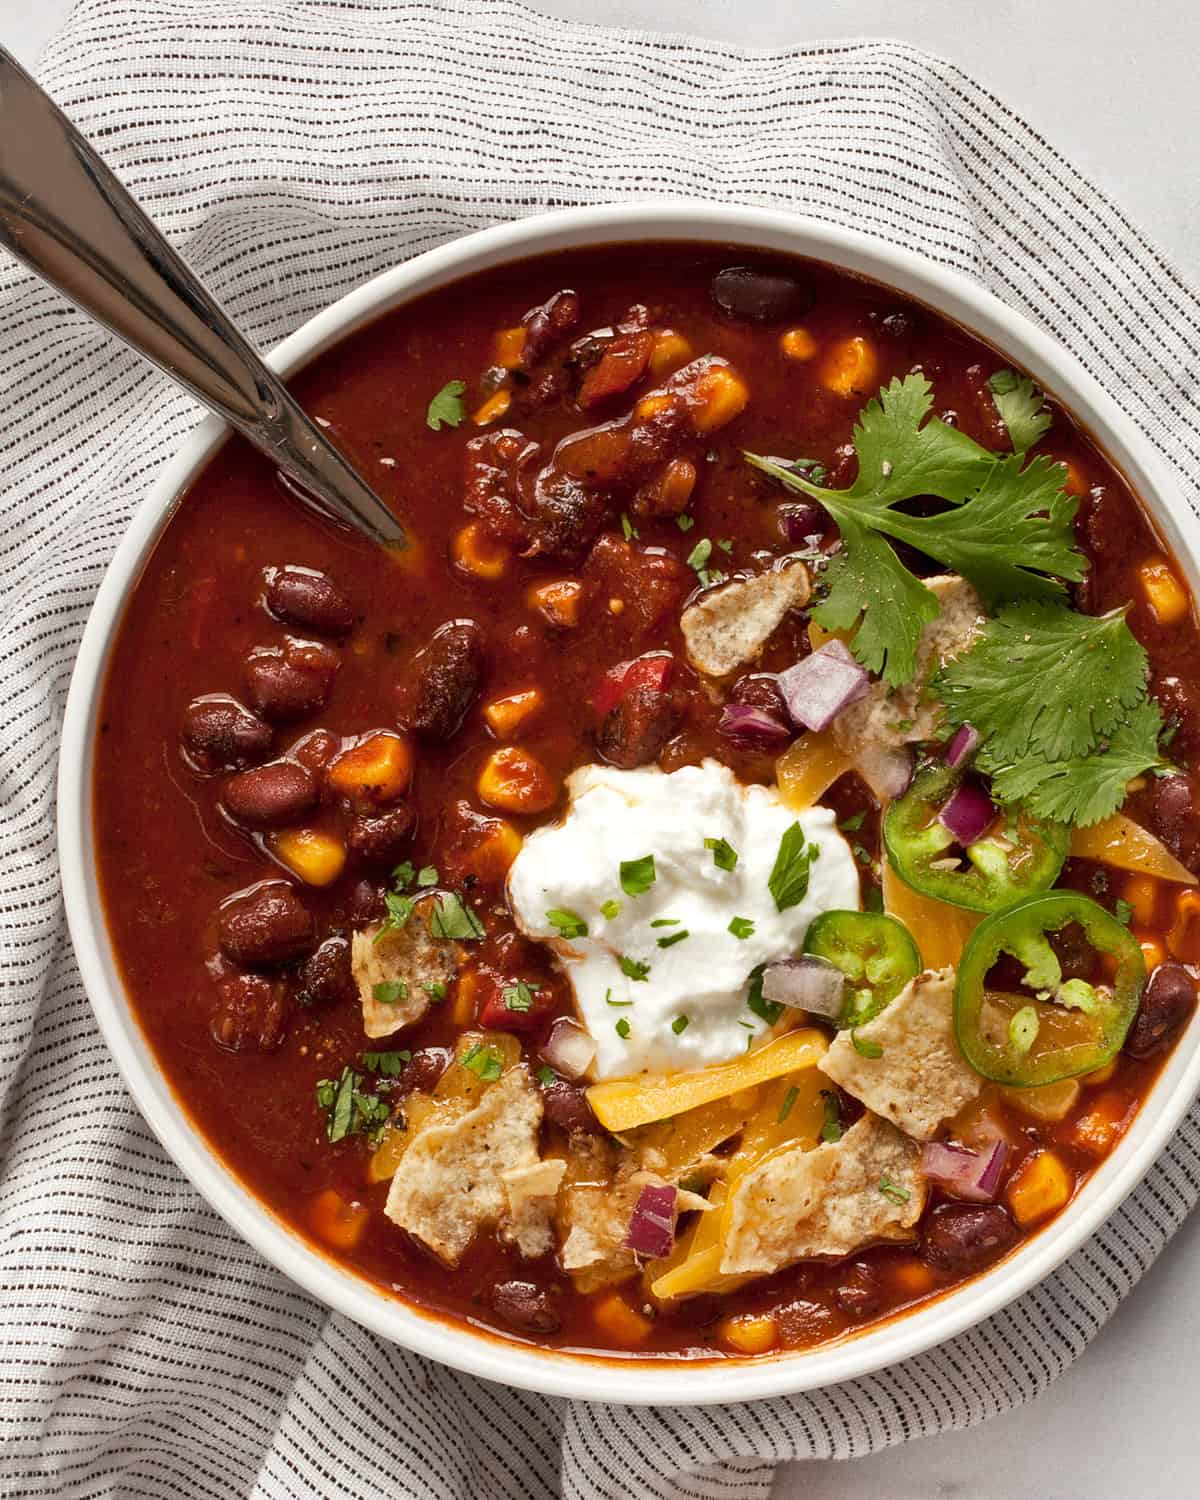 Bowl of chili with black beans, corn and tomatoes.